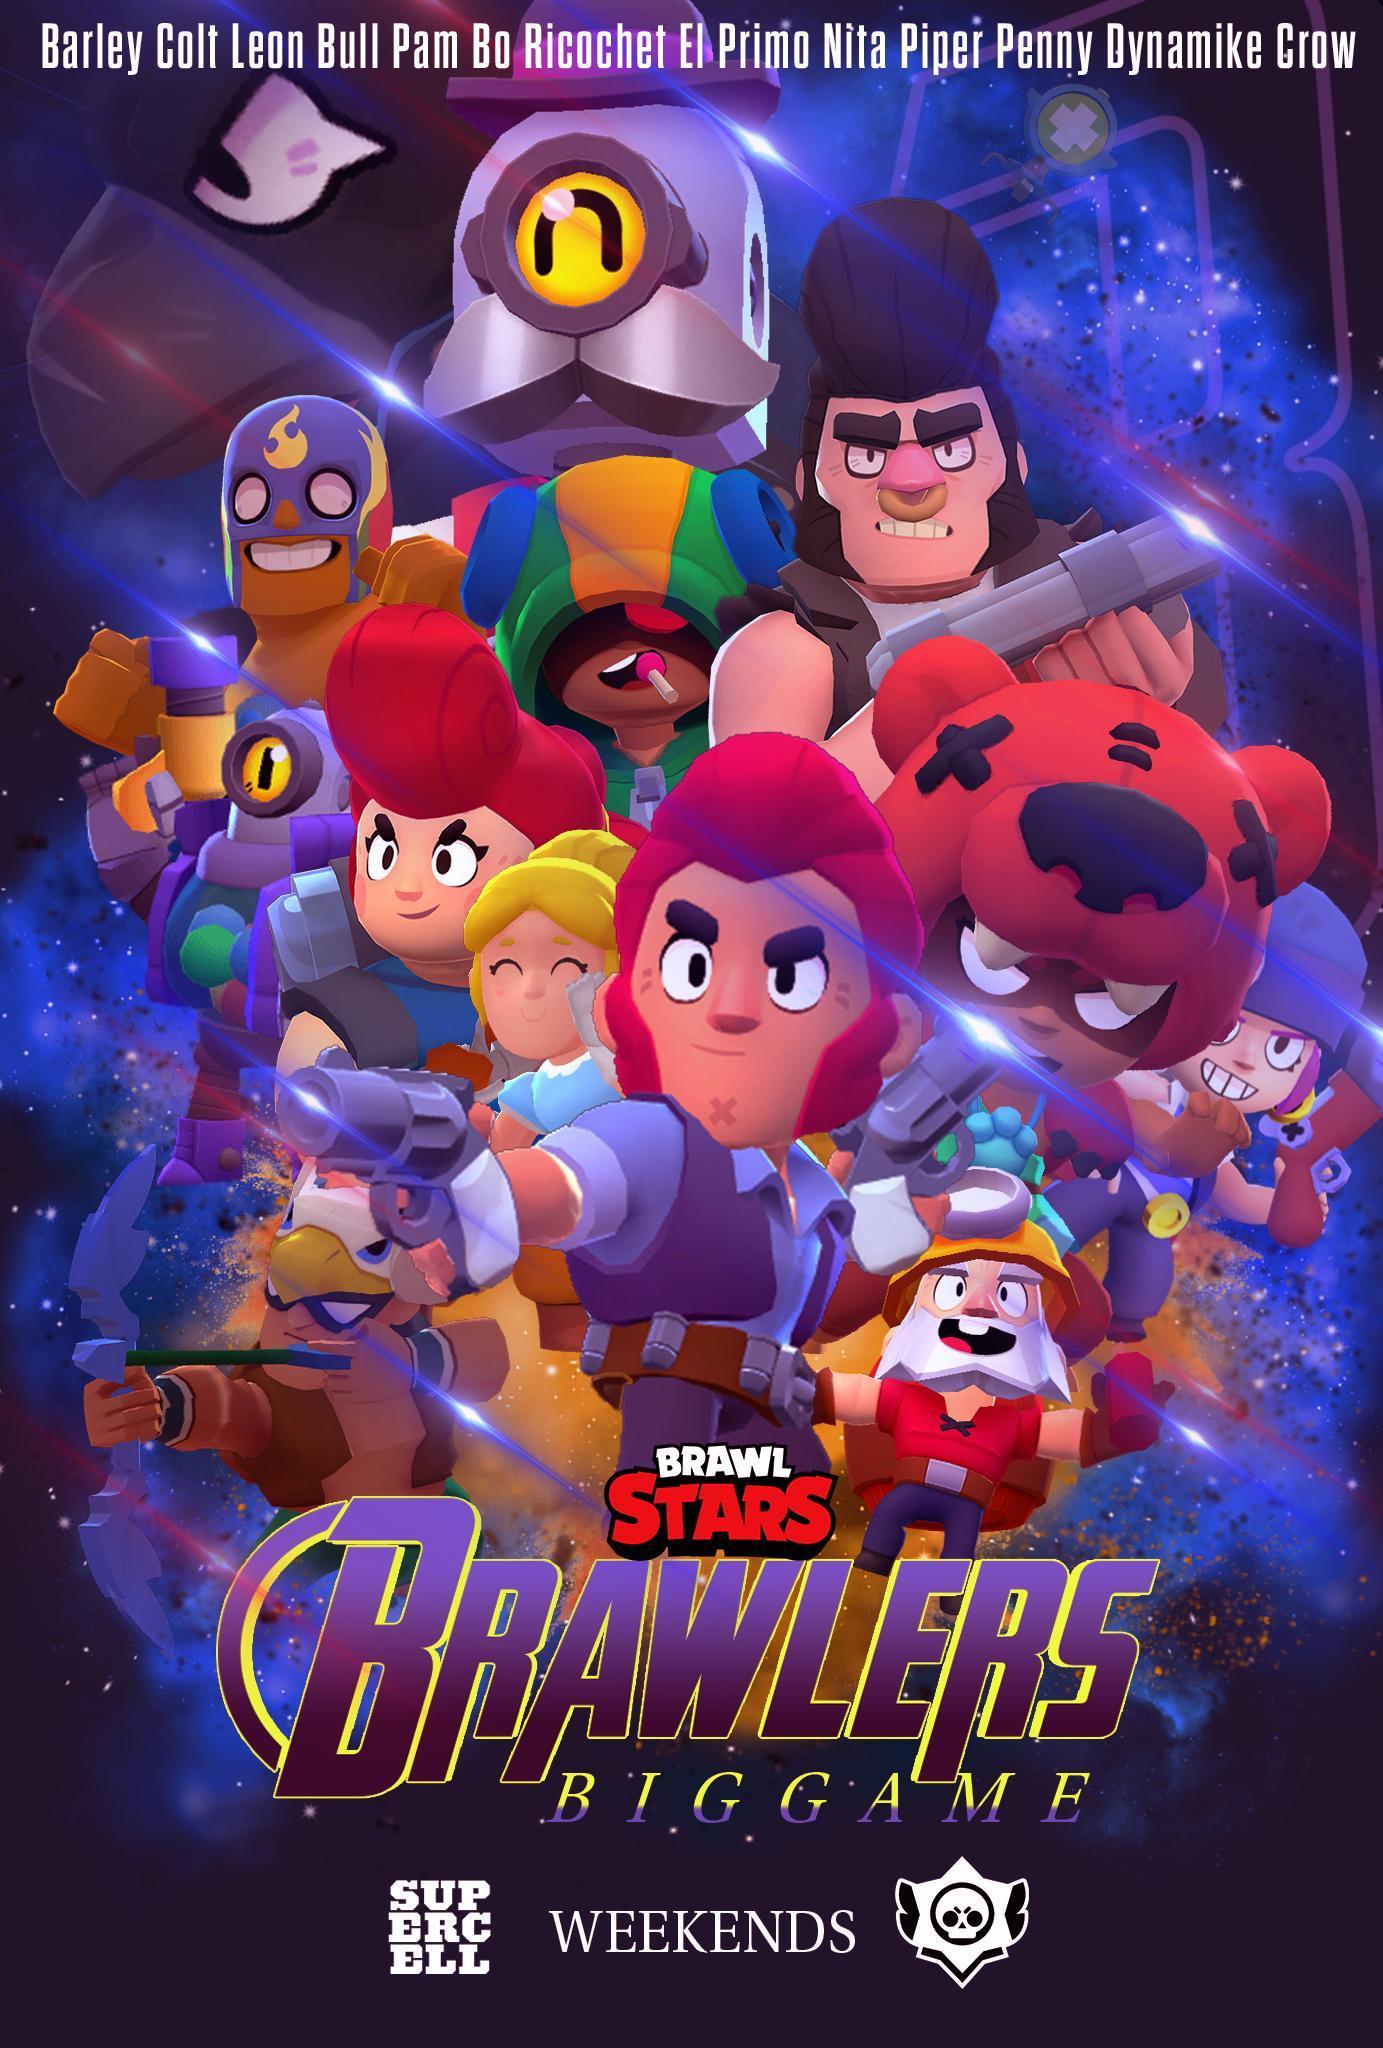 Colt Vs Shelly New 2019 Hd Wallpaper For Android Apk Download - piper brawl stars walapper